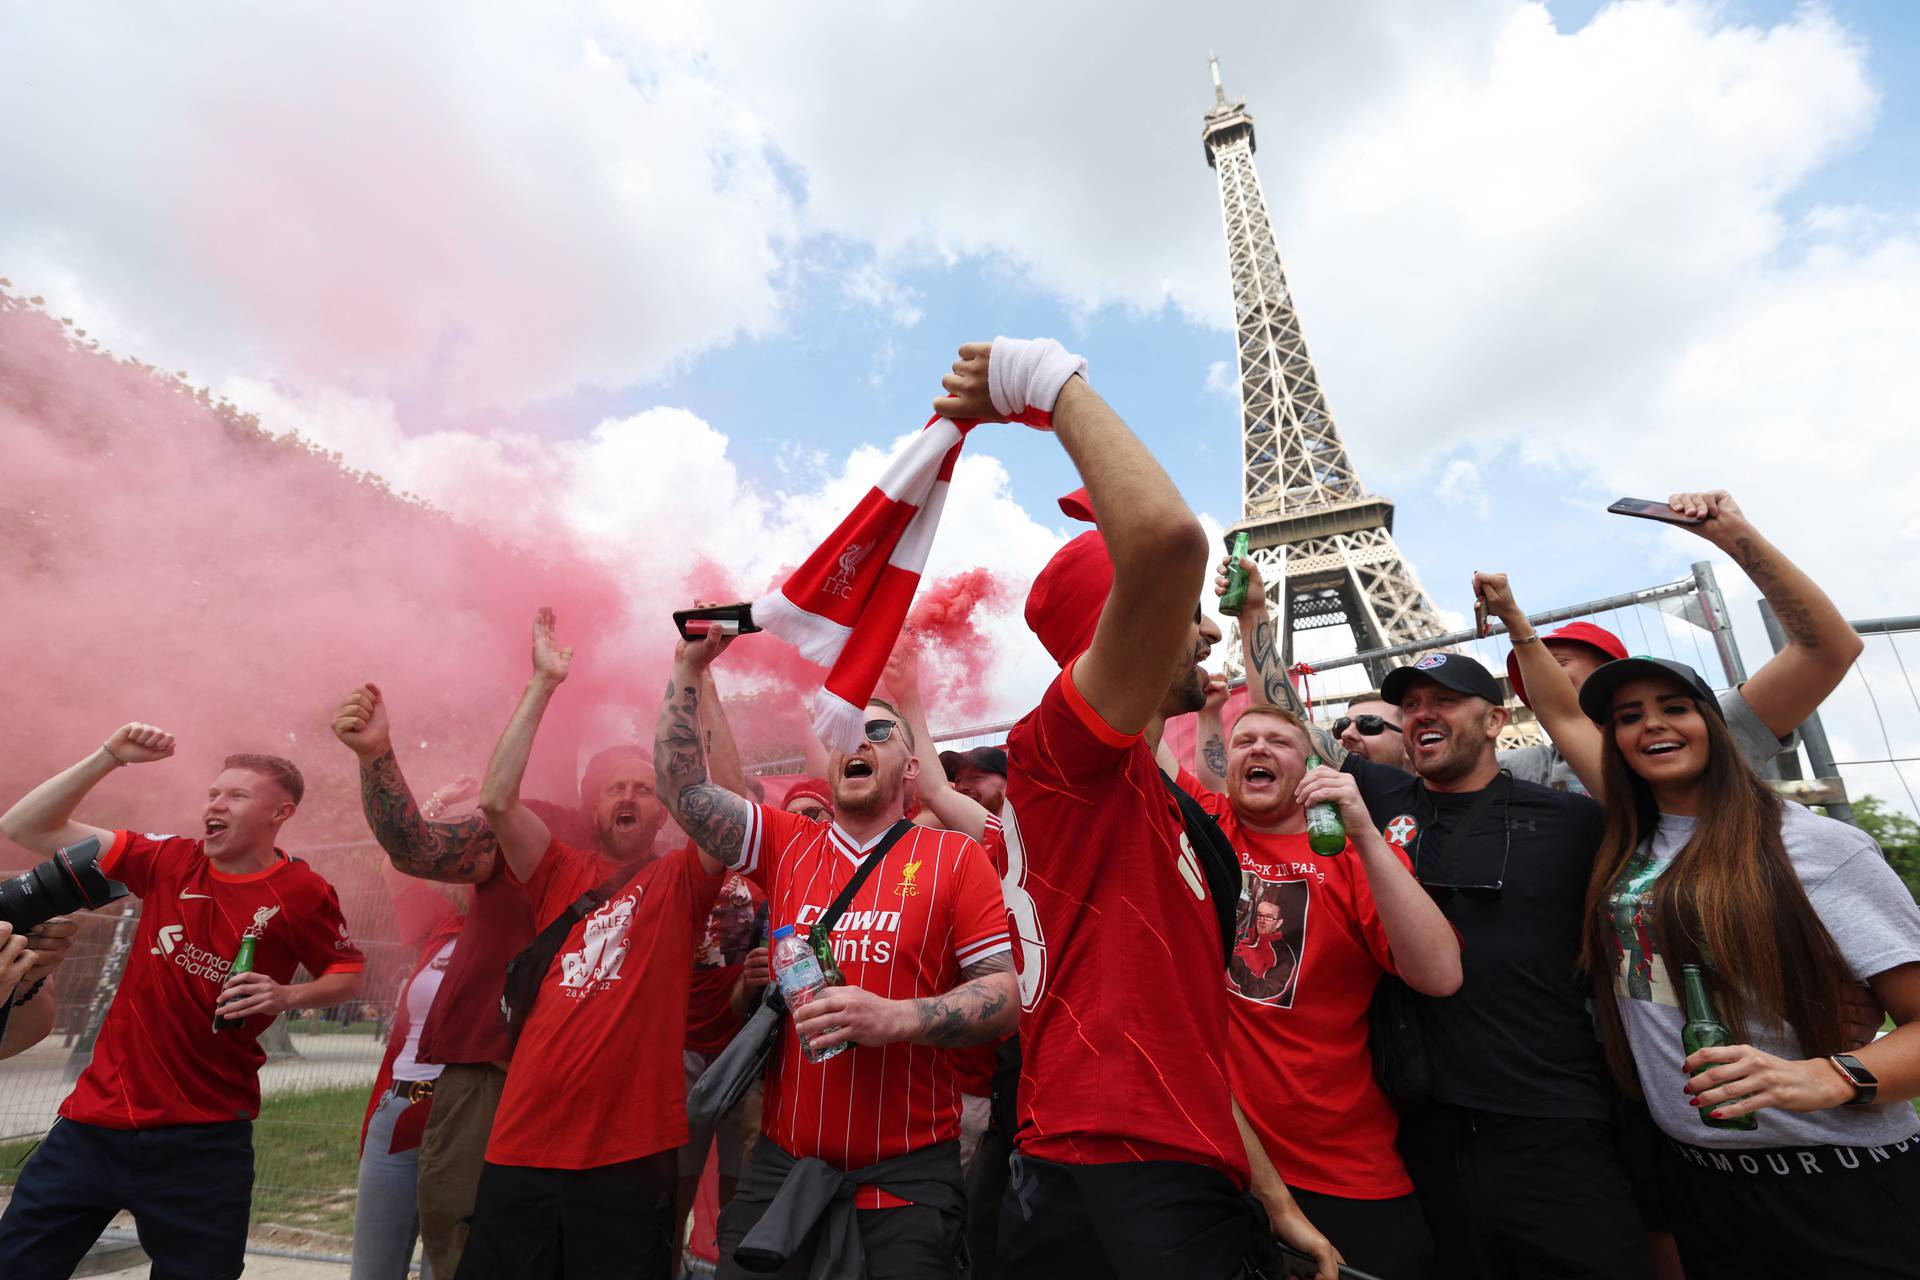 Champions League - Final - Fans gather in Paris for Liverpool v Real Madrid in the Champions League Final